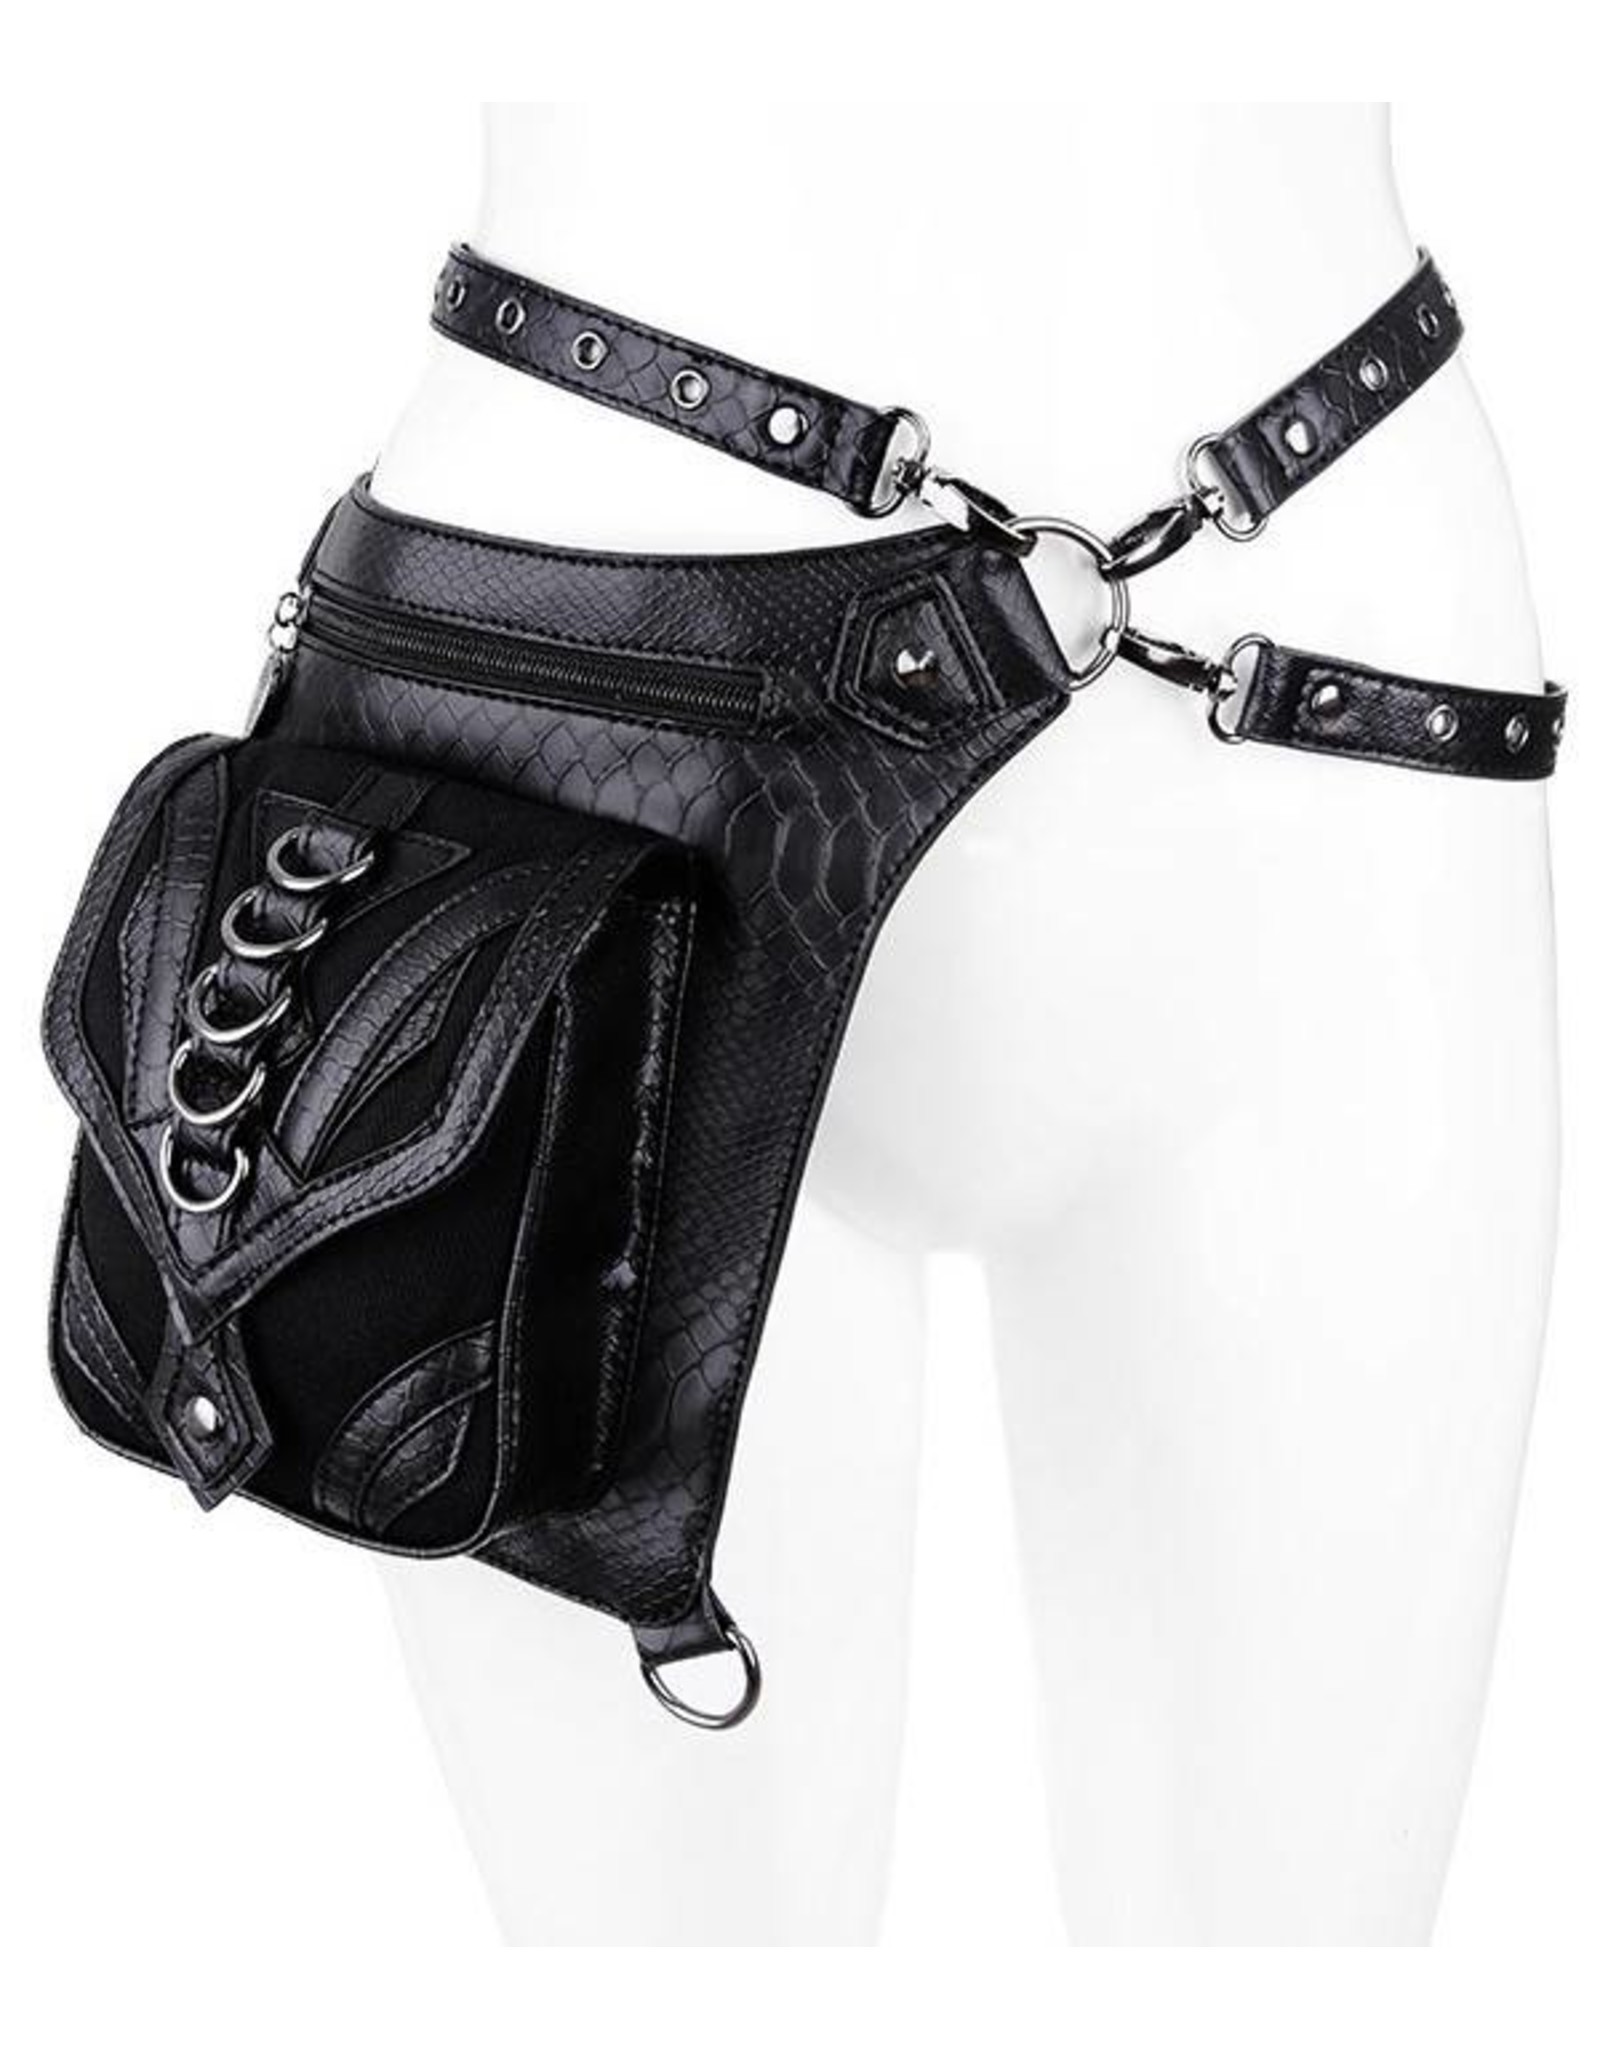 Restyle Gothic bags Steampunk bags - Steampunk Utility Belt Dragon Holster Restyle